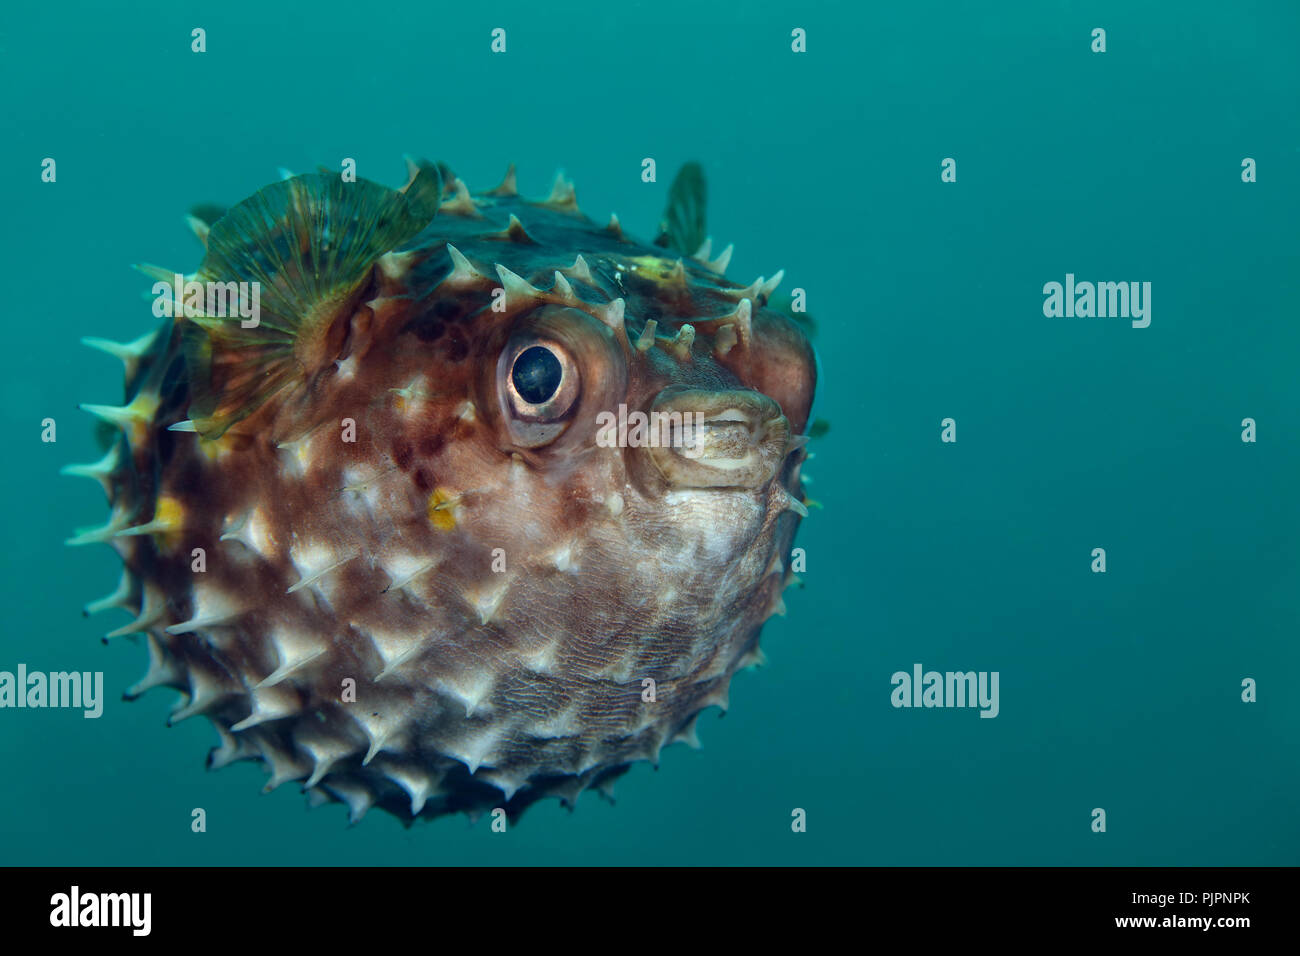 Porcupinefish.  Picture was taken in Lembeh strait, Indonesia Stock Photo